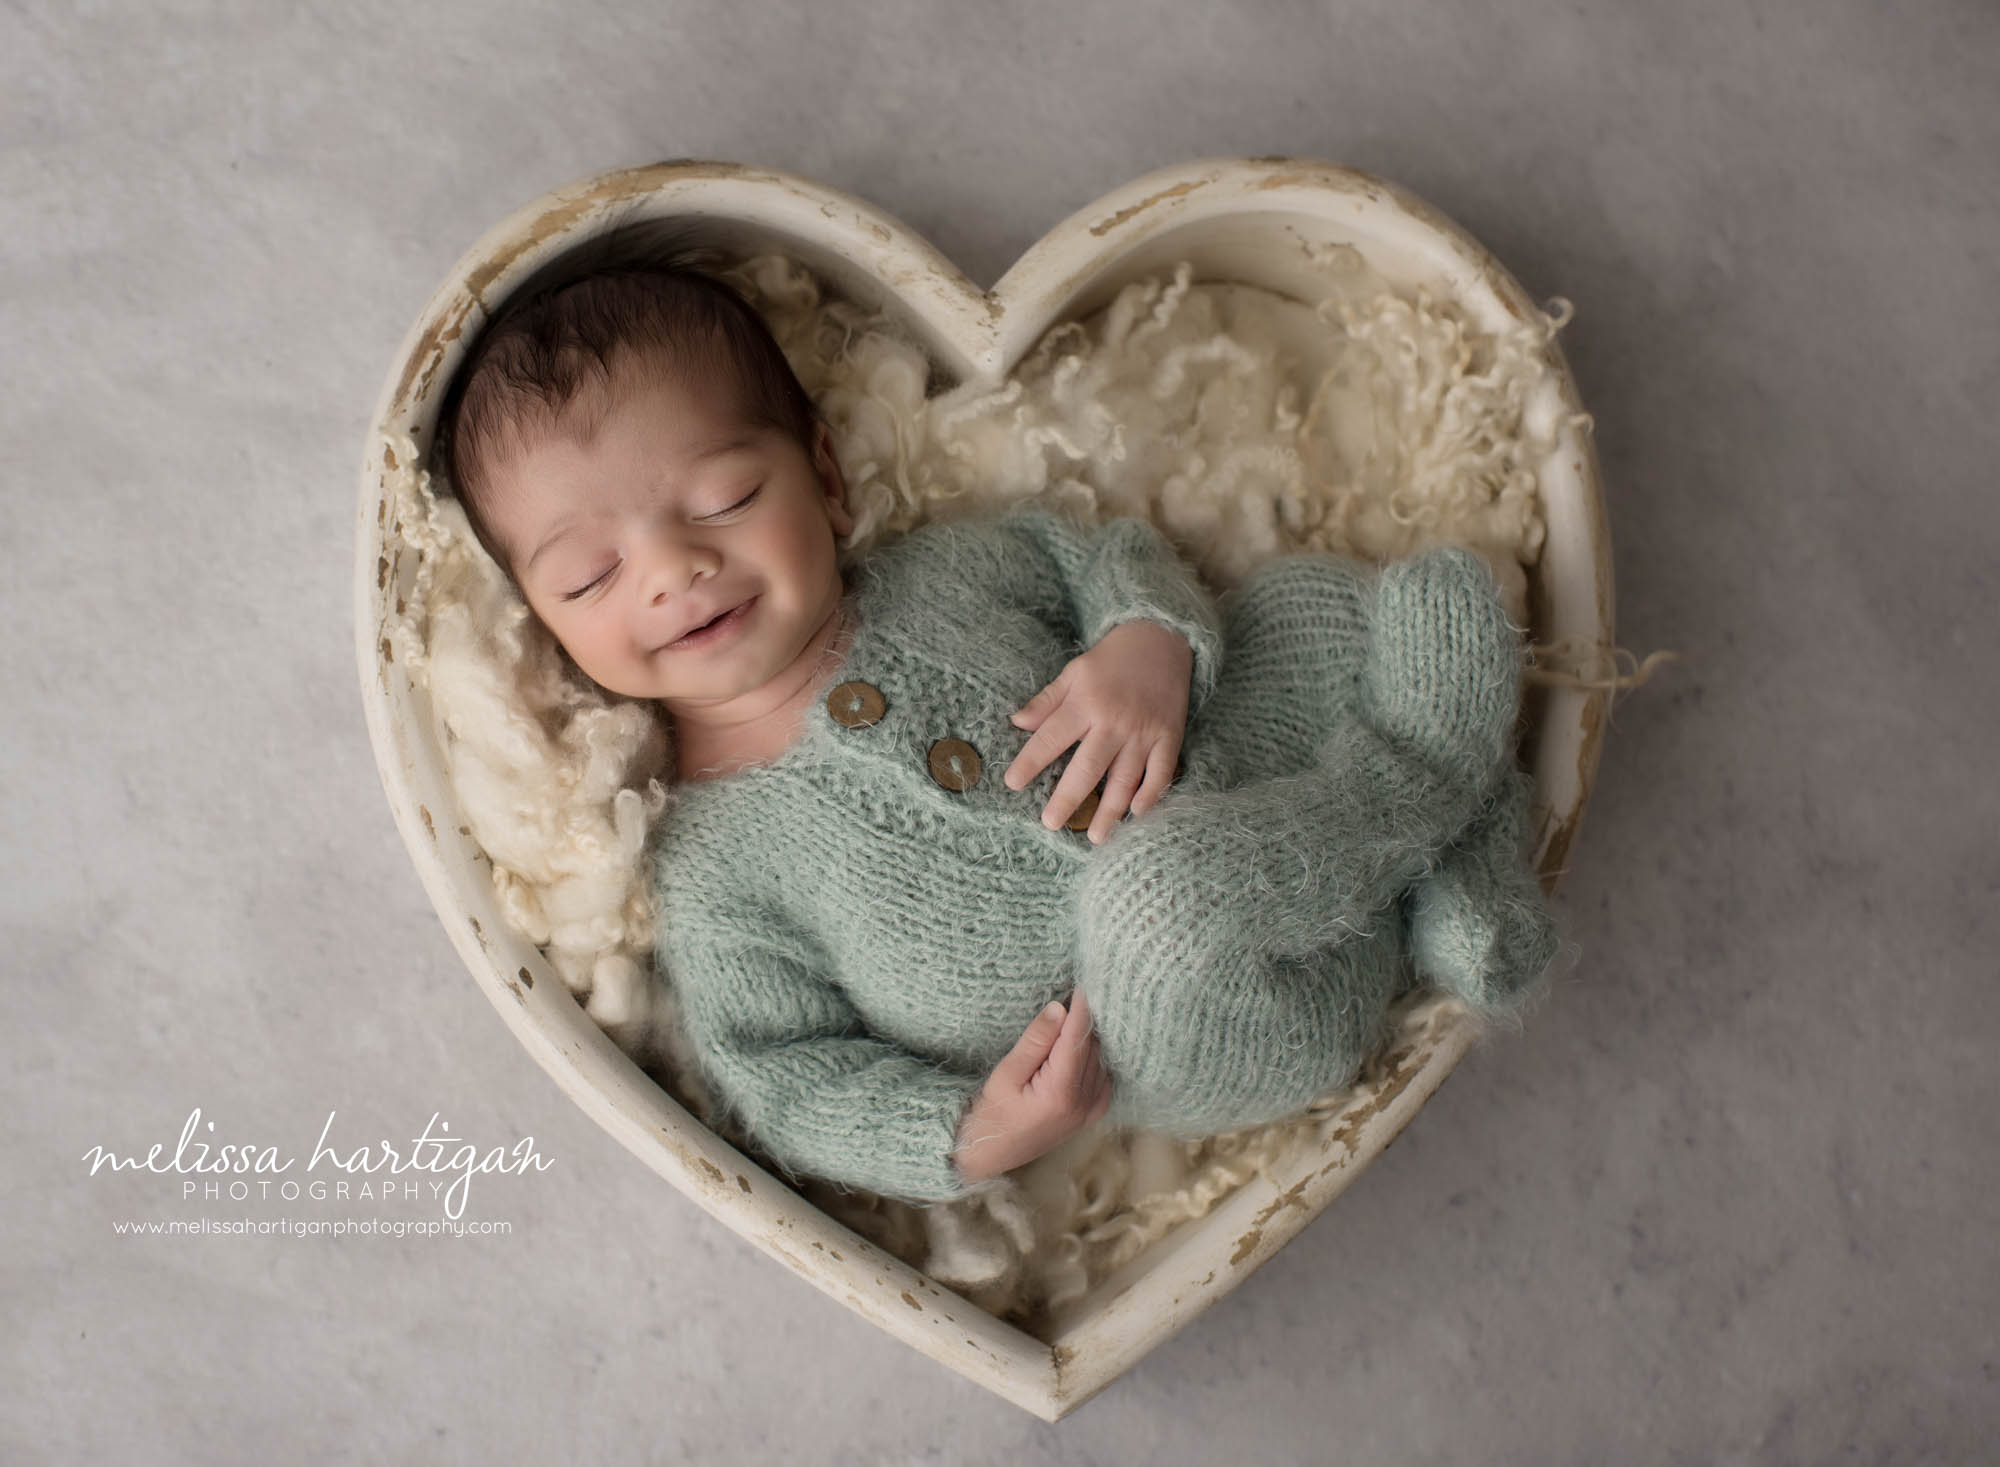 newborn baby boy wearing teal outfit smiling posed in heart shaped wooden bowl prop